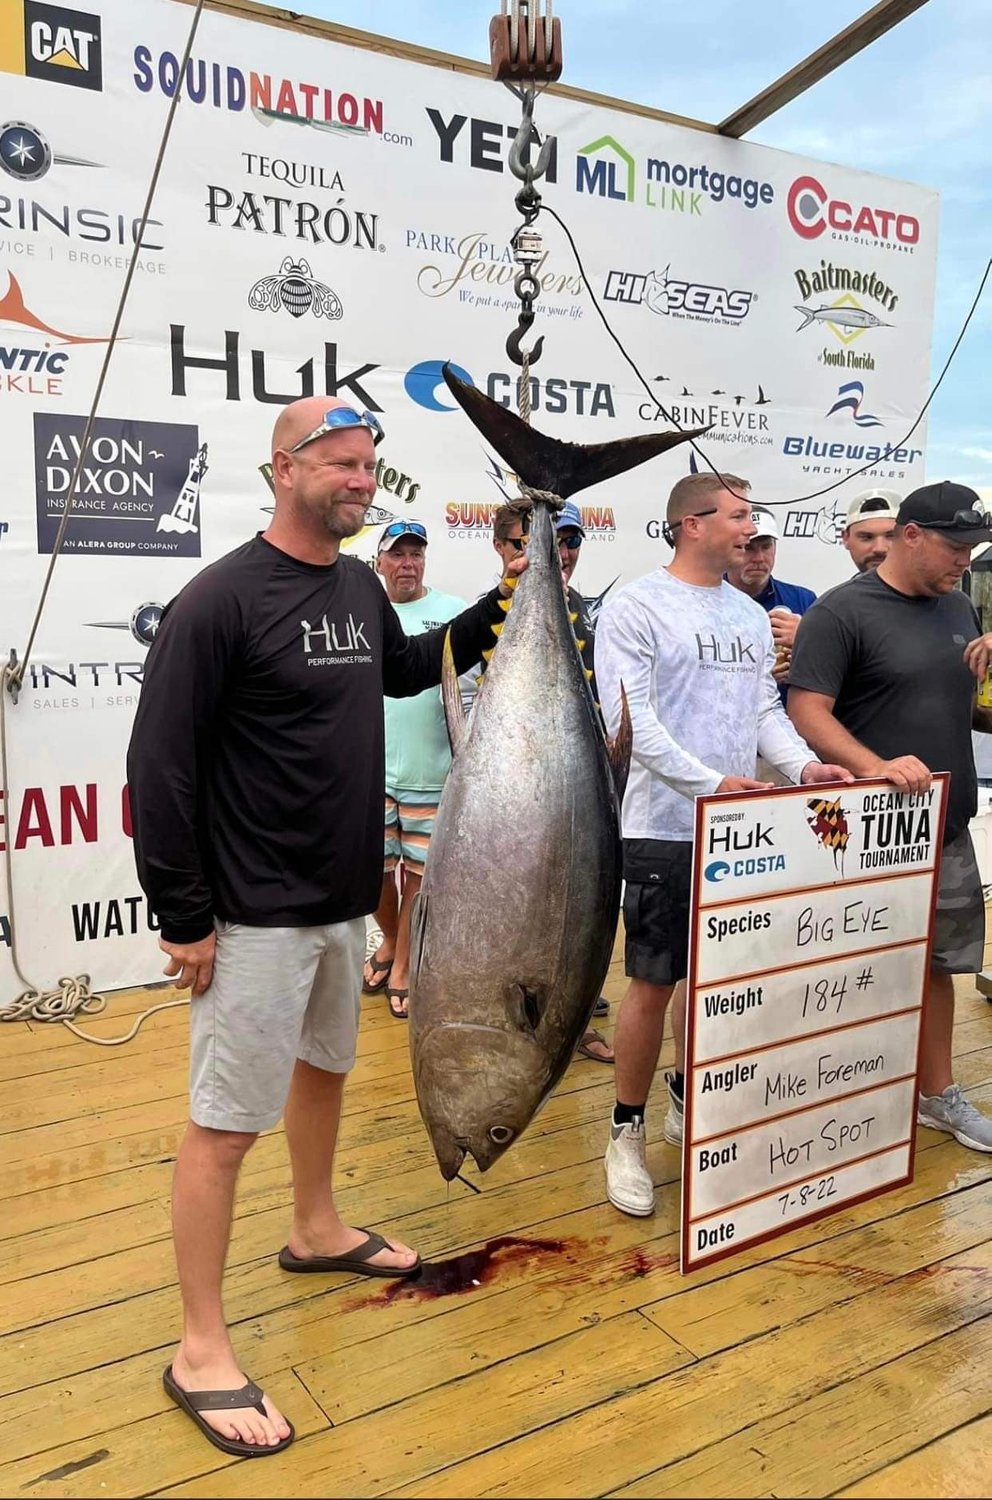 Mike Foreman (left) and the Ole School Anglers finished in 10th place at the Ocean City Tuna Tournament in July after catching a 184-pound fish.